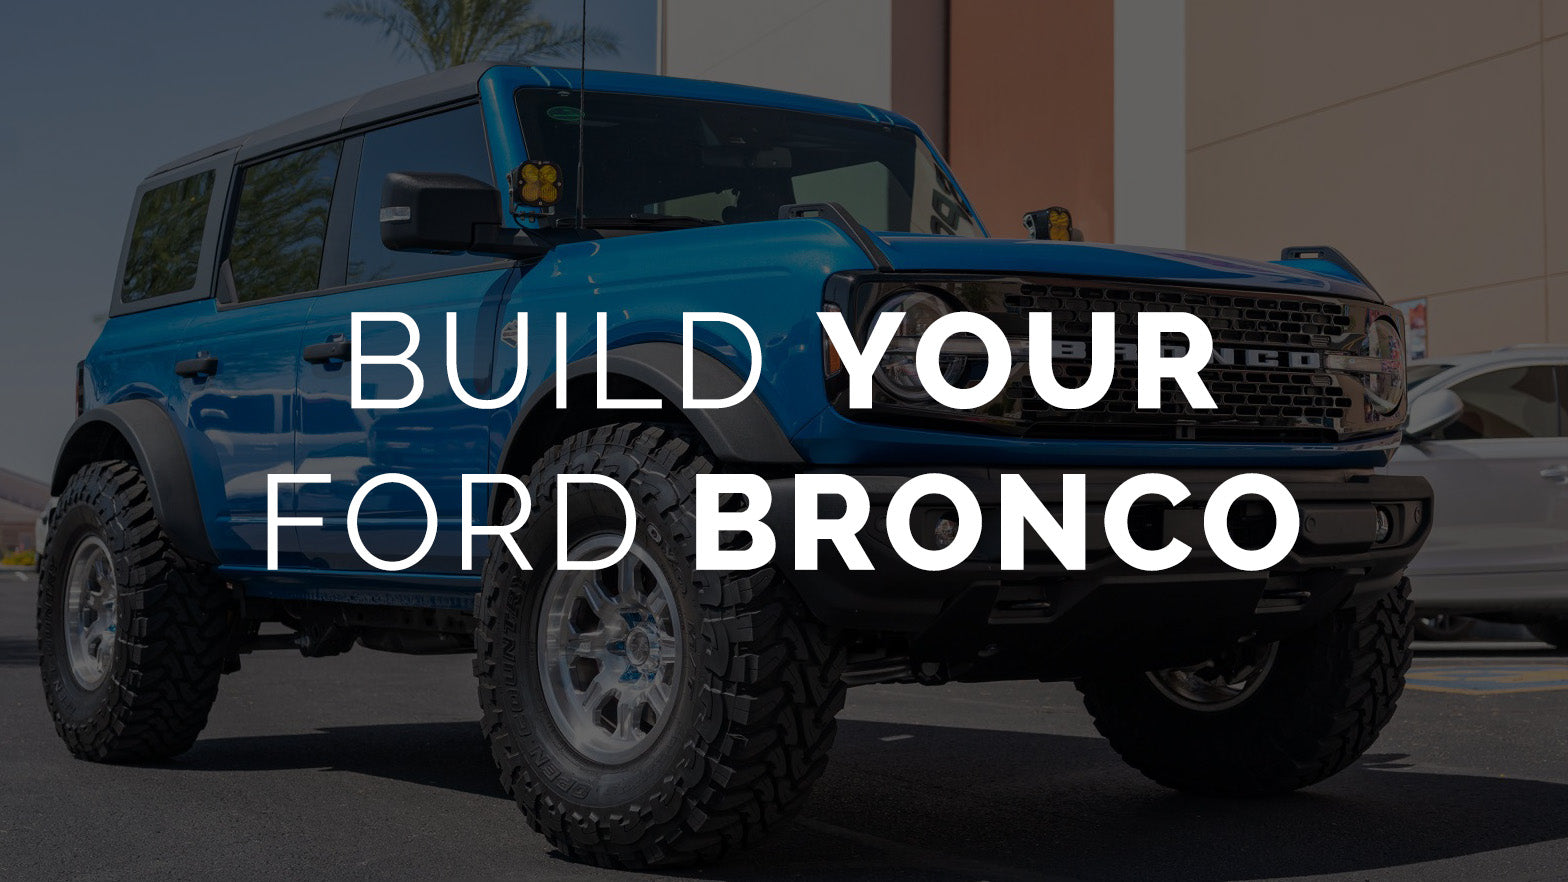 Ford Bronco Products In Stock at SDHQ